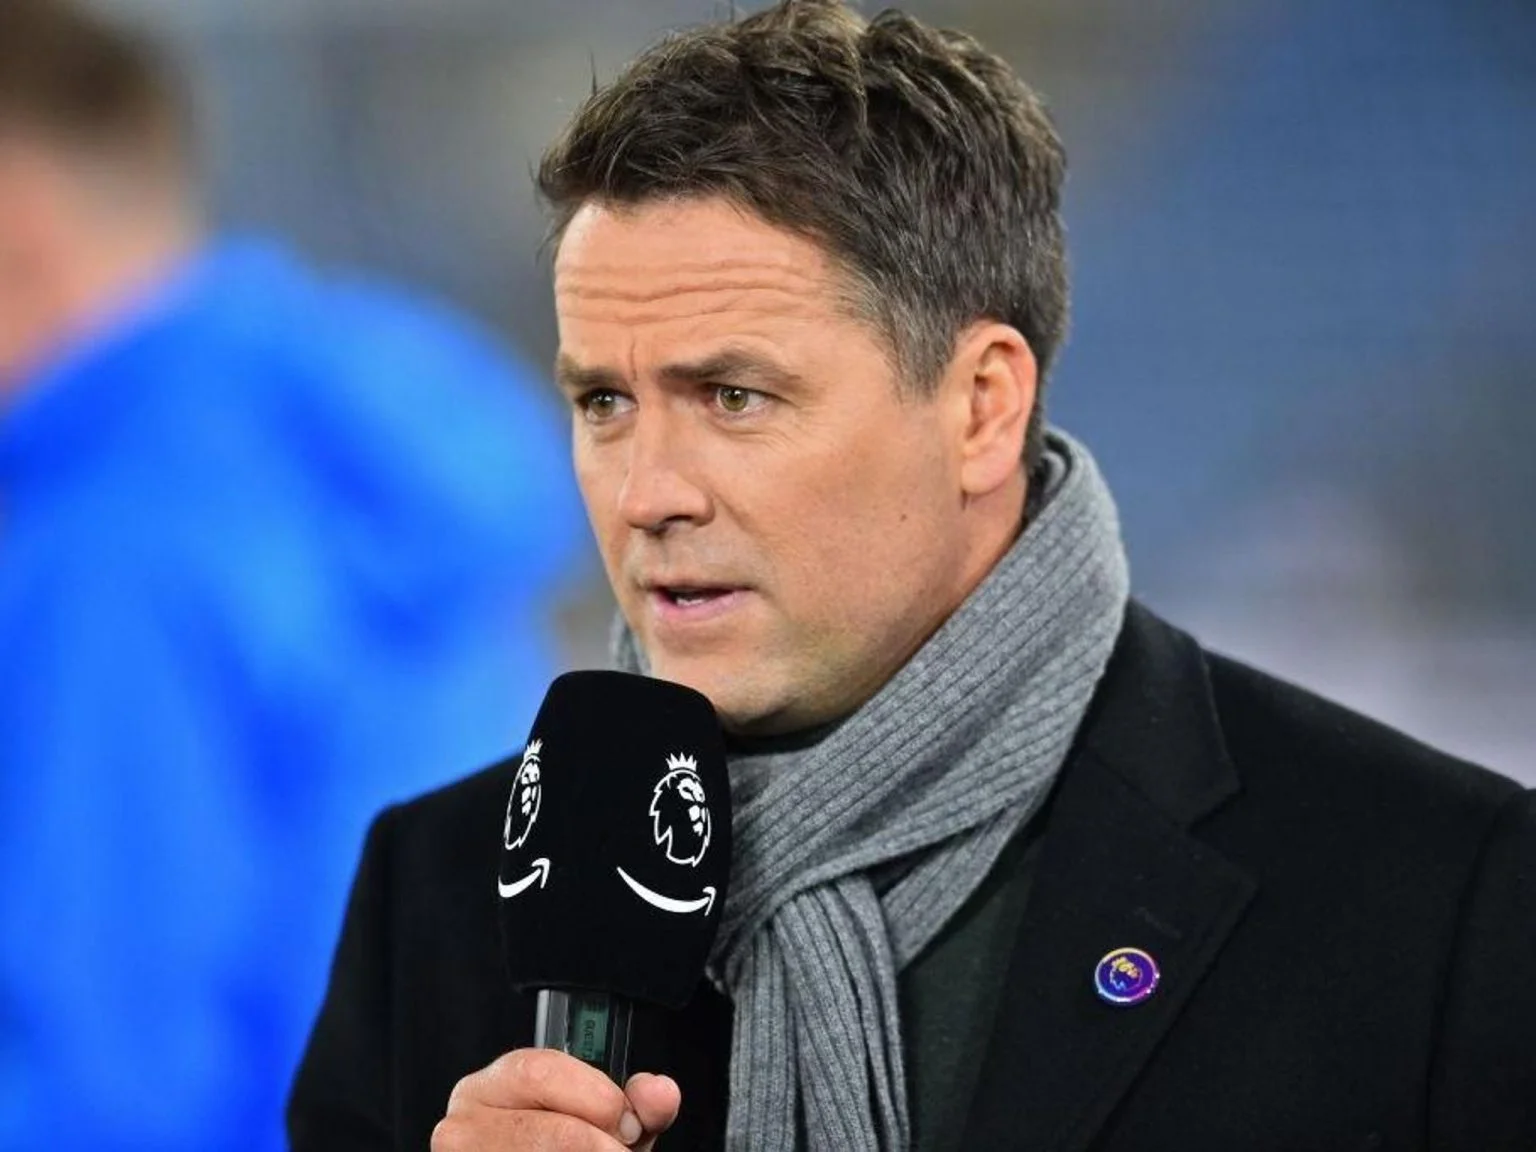 UCL: Michael Owen names player that’ll help Real Madrid compete with Man City, Liverpool